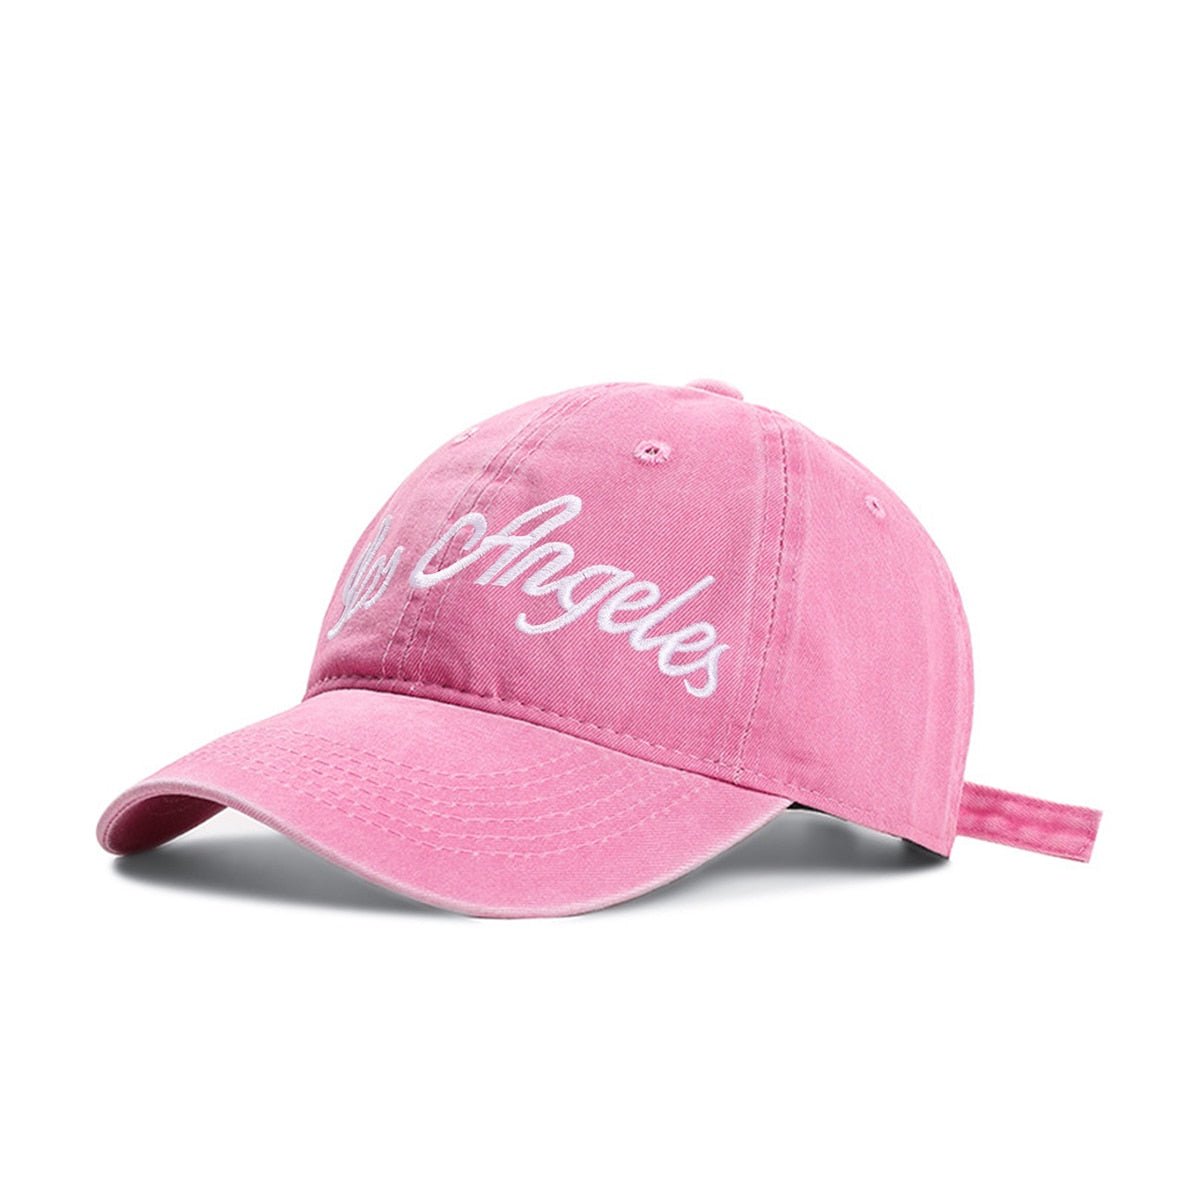 Pink Embroidered Baseball Cap - Hats